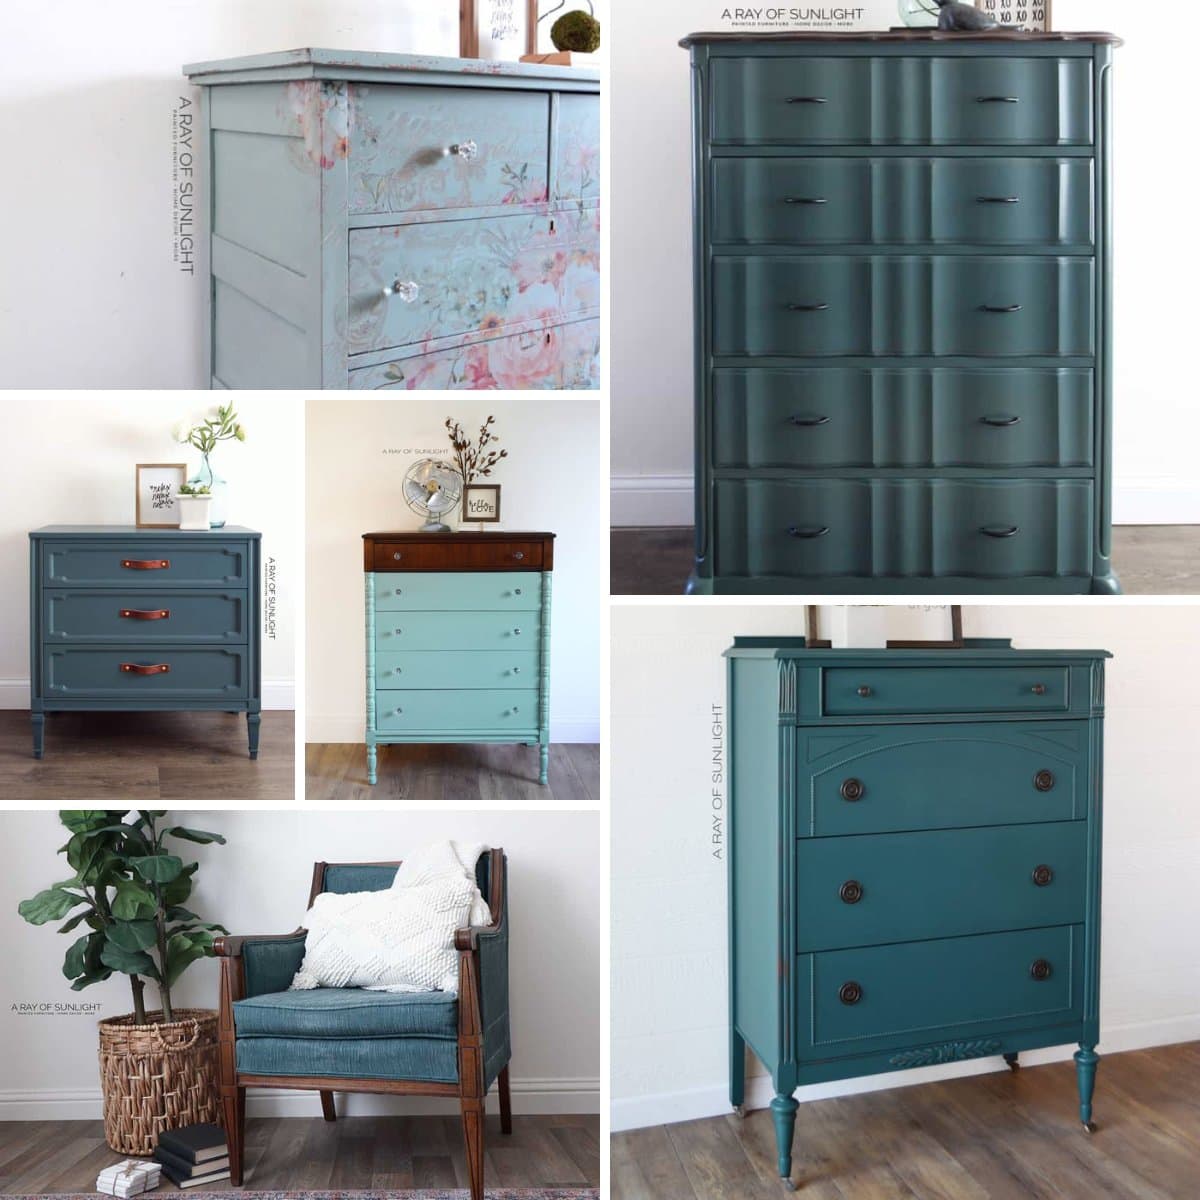 Creating a Teal Blue Blended Furniture Finish with Chalk Style Paint -  Country Chic Paint